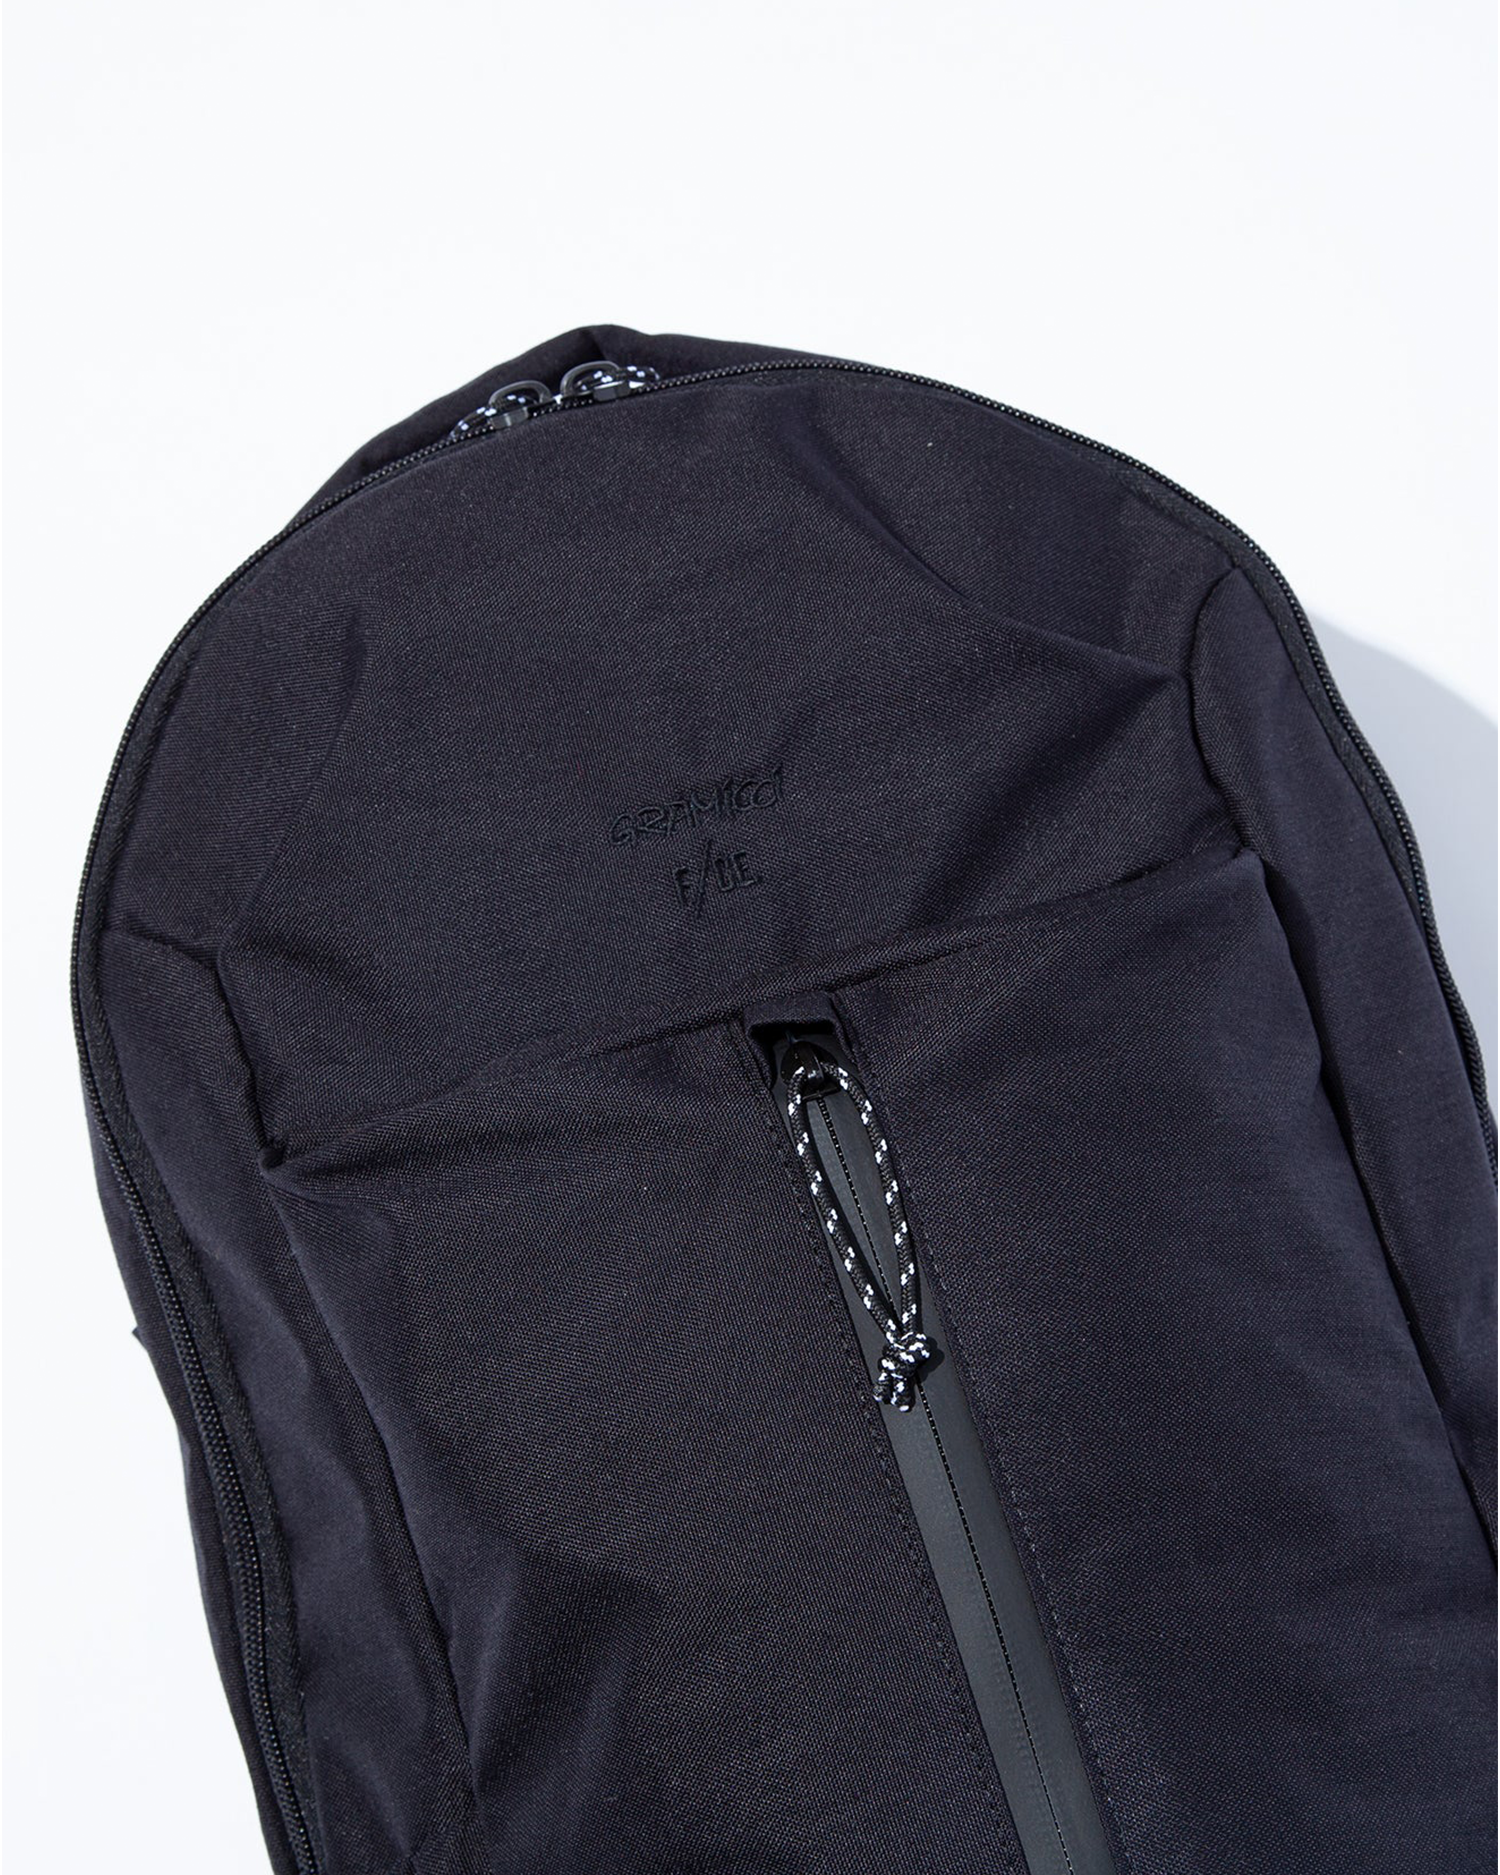 F/CE Technical Travel Pack - Black